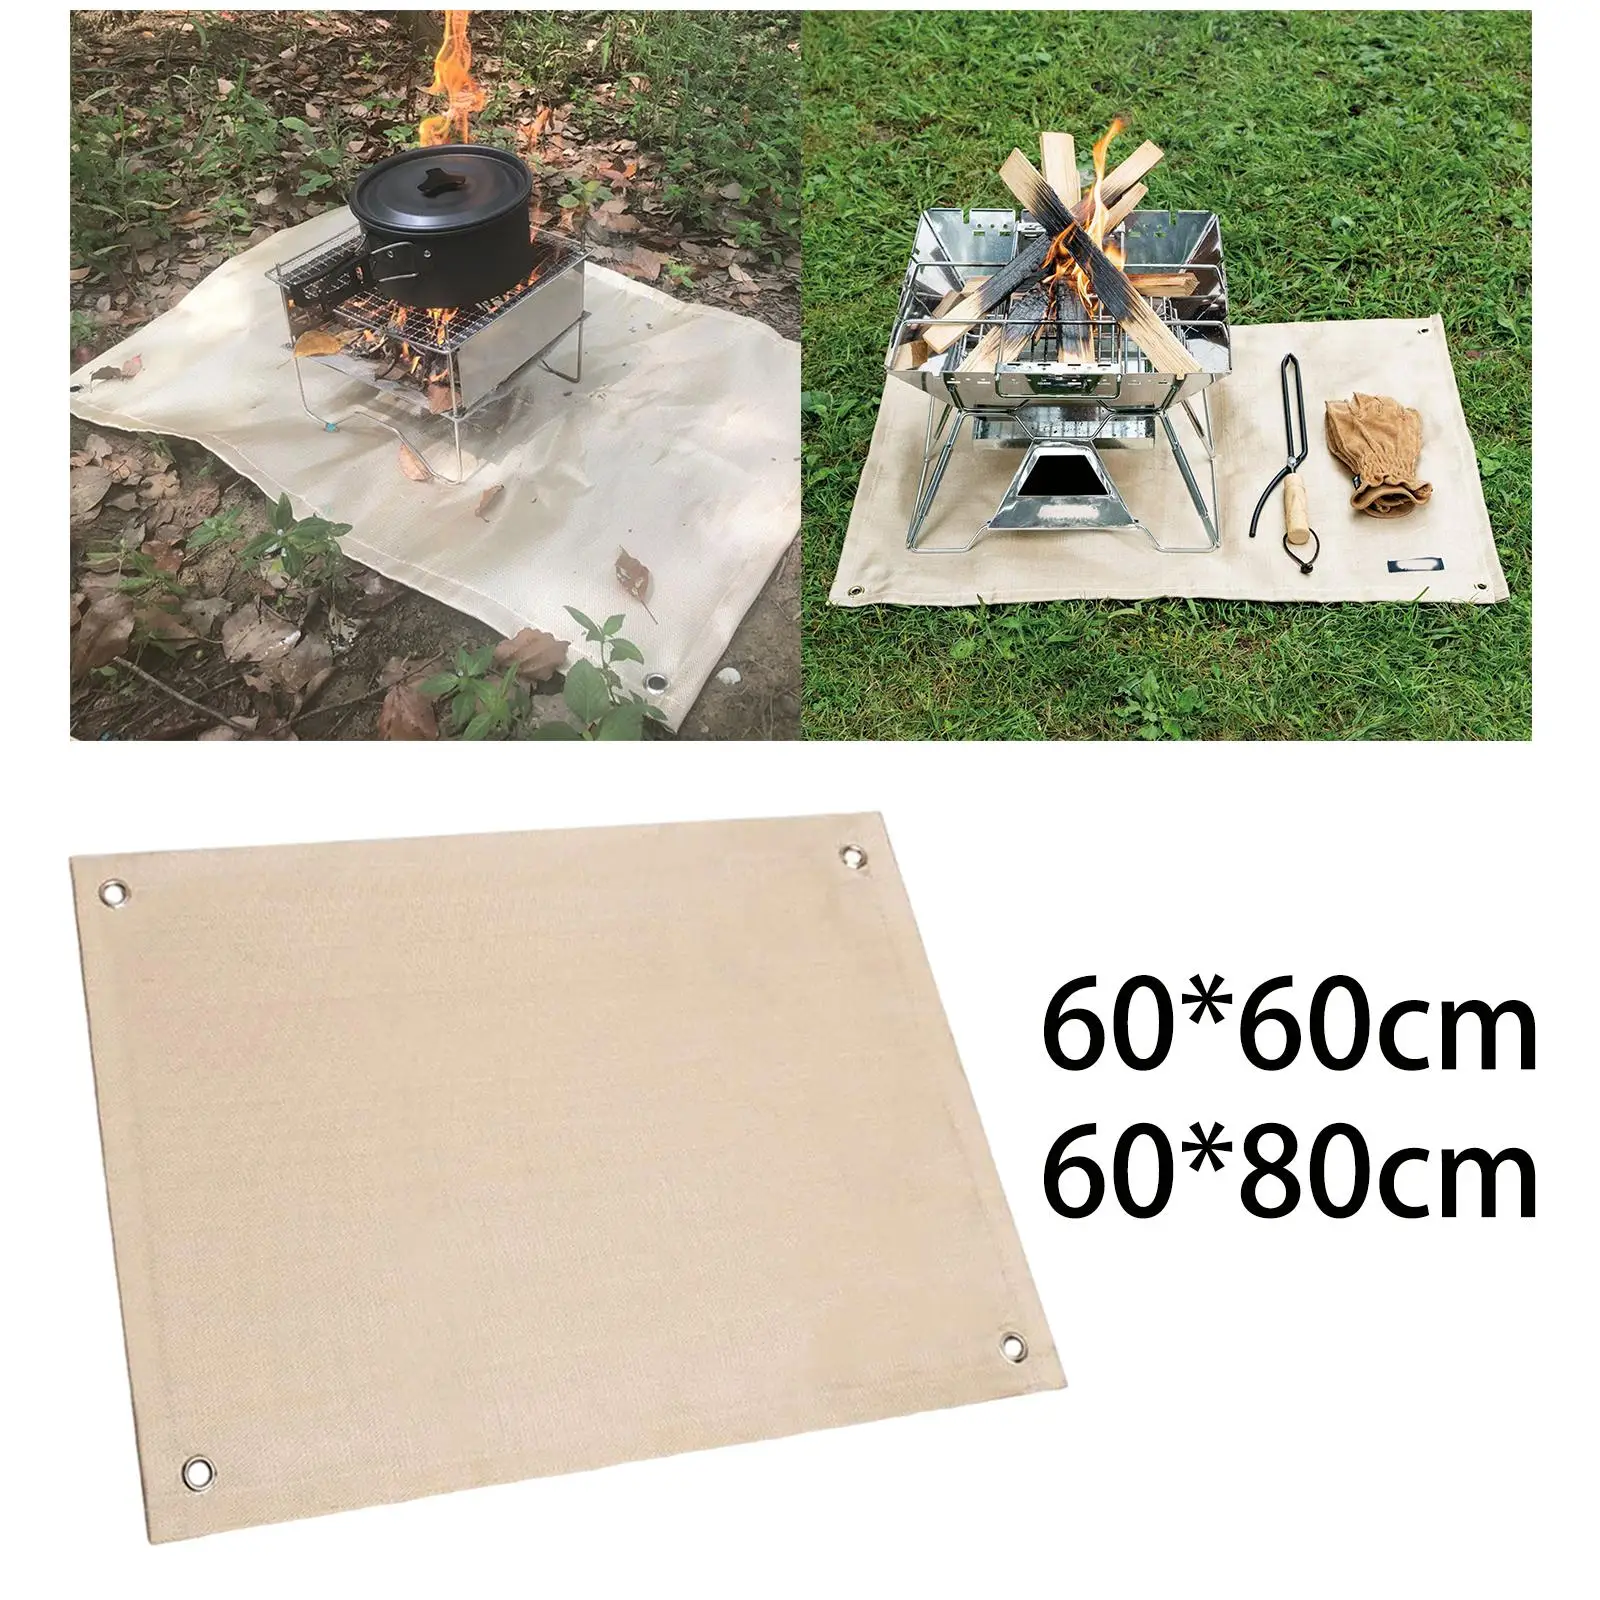 Glass Fiber Camping Fire Blanket High Temperature Resistant Protective Shockproof Fireproof Mat for Stove Picnics Lawn BBQ Deck